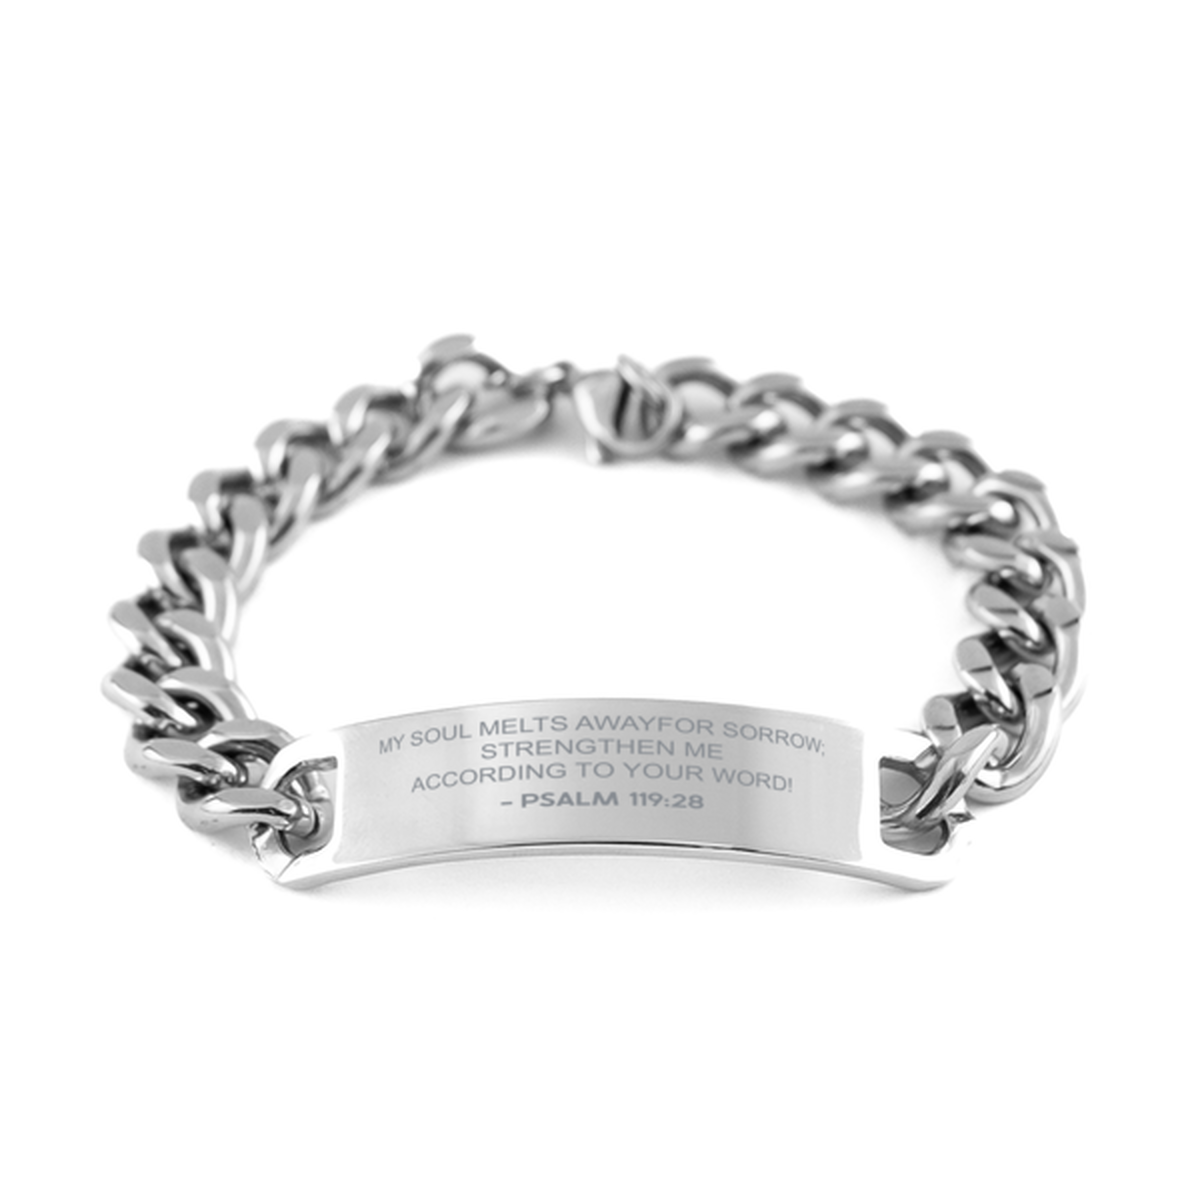 Bible Verse Chain Stainless Steel Bracelet, Psalm 119:28 My Soul Melts Away For Sorrow; Strengthen Me, Inspirational Christian Gifts For Men Women